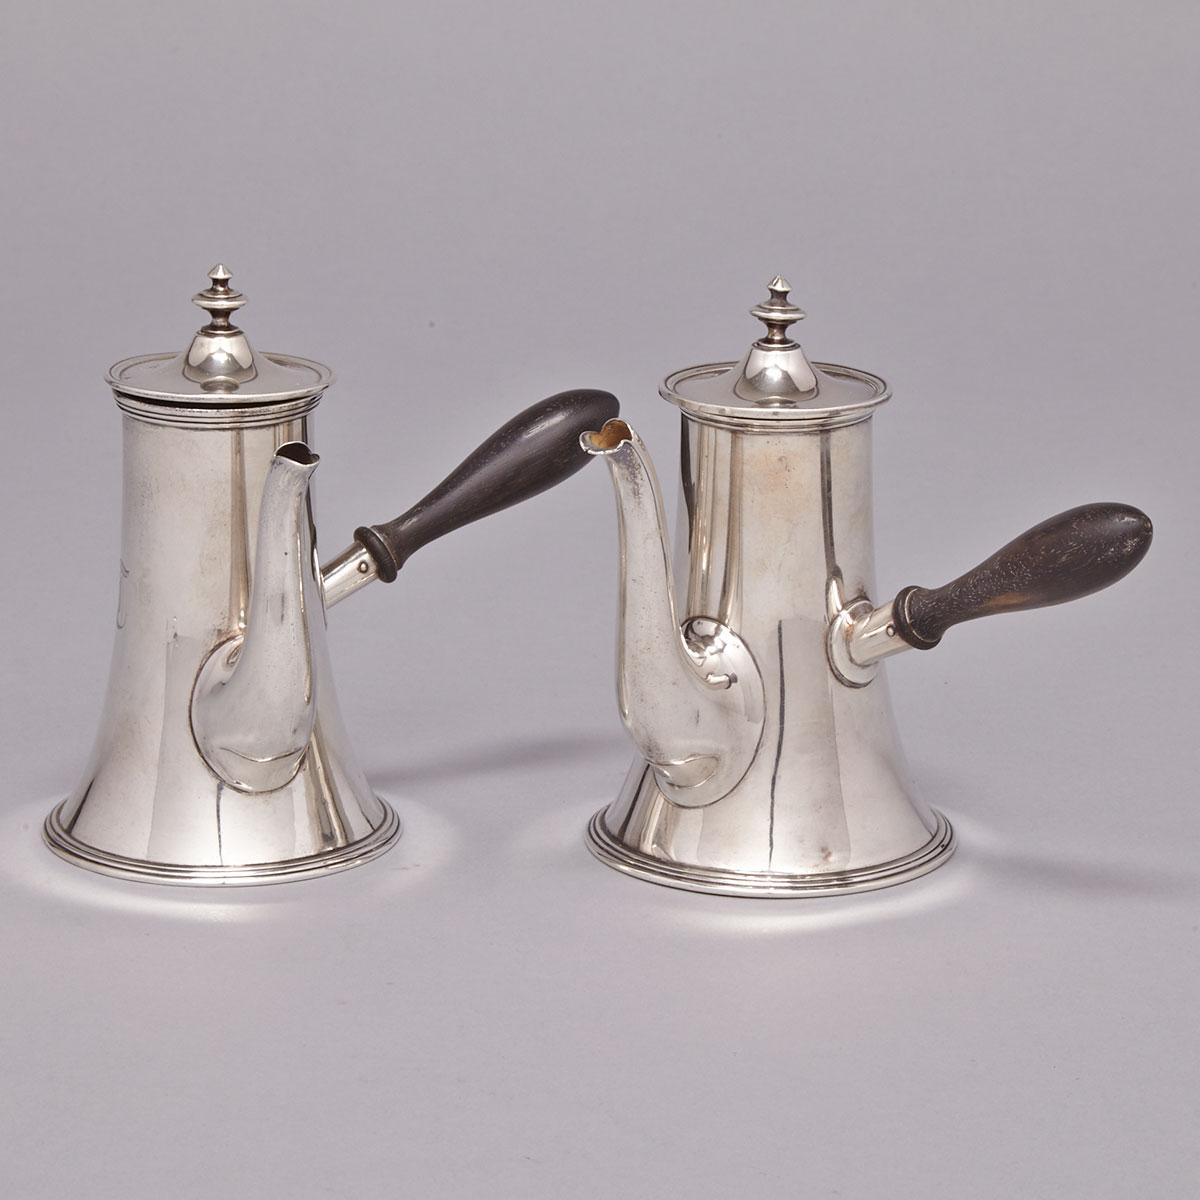 Two Canadian Silver Small Coffee Pots, Ryrie Bros., Toronto, Ont., early 20th century